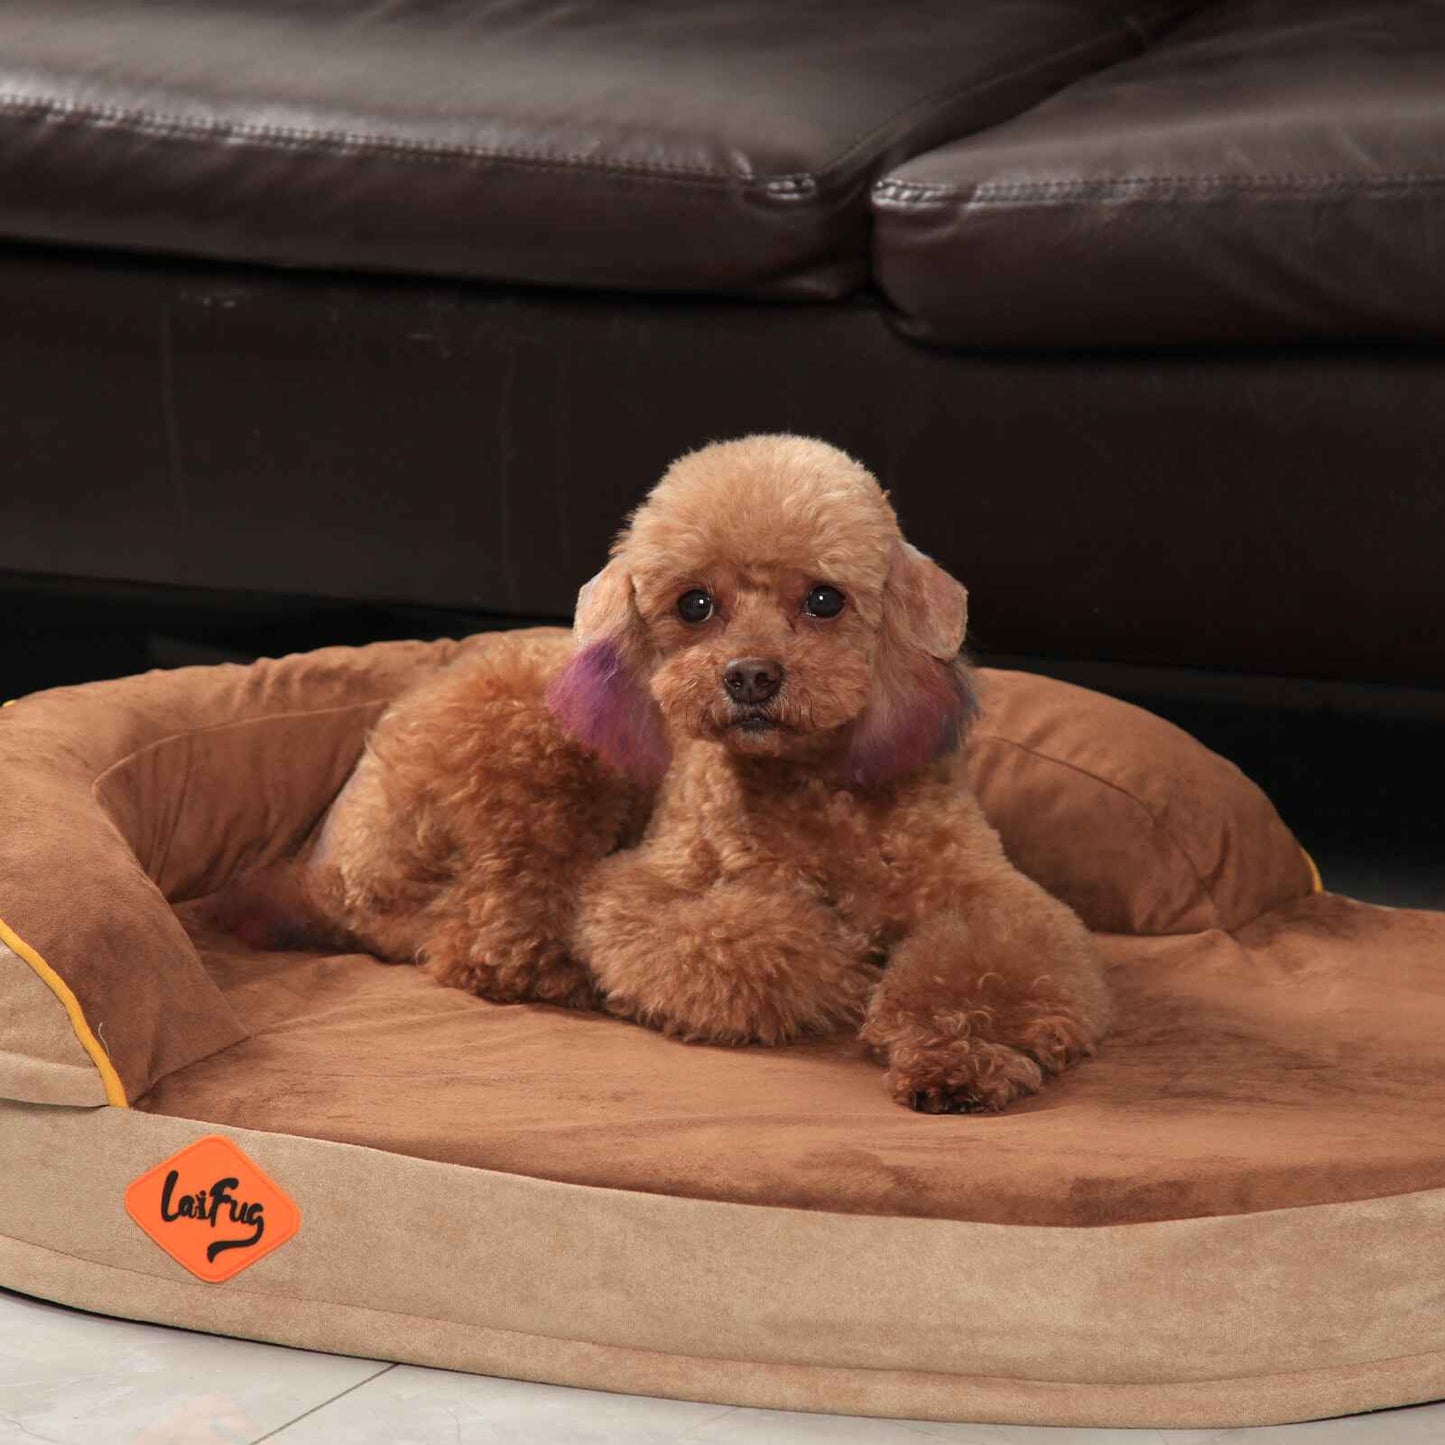 Oval Dog Bed